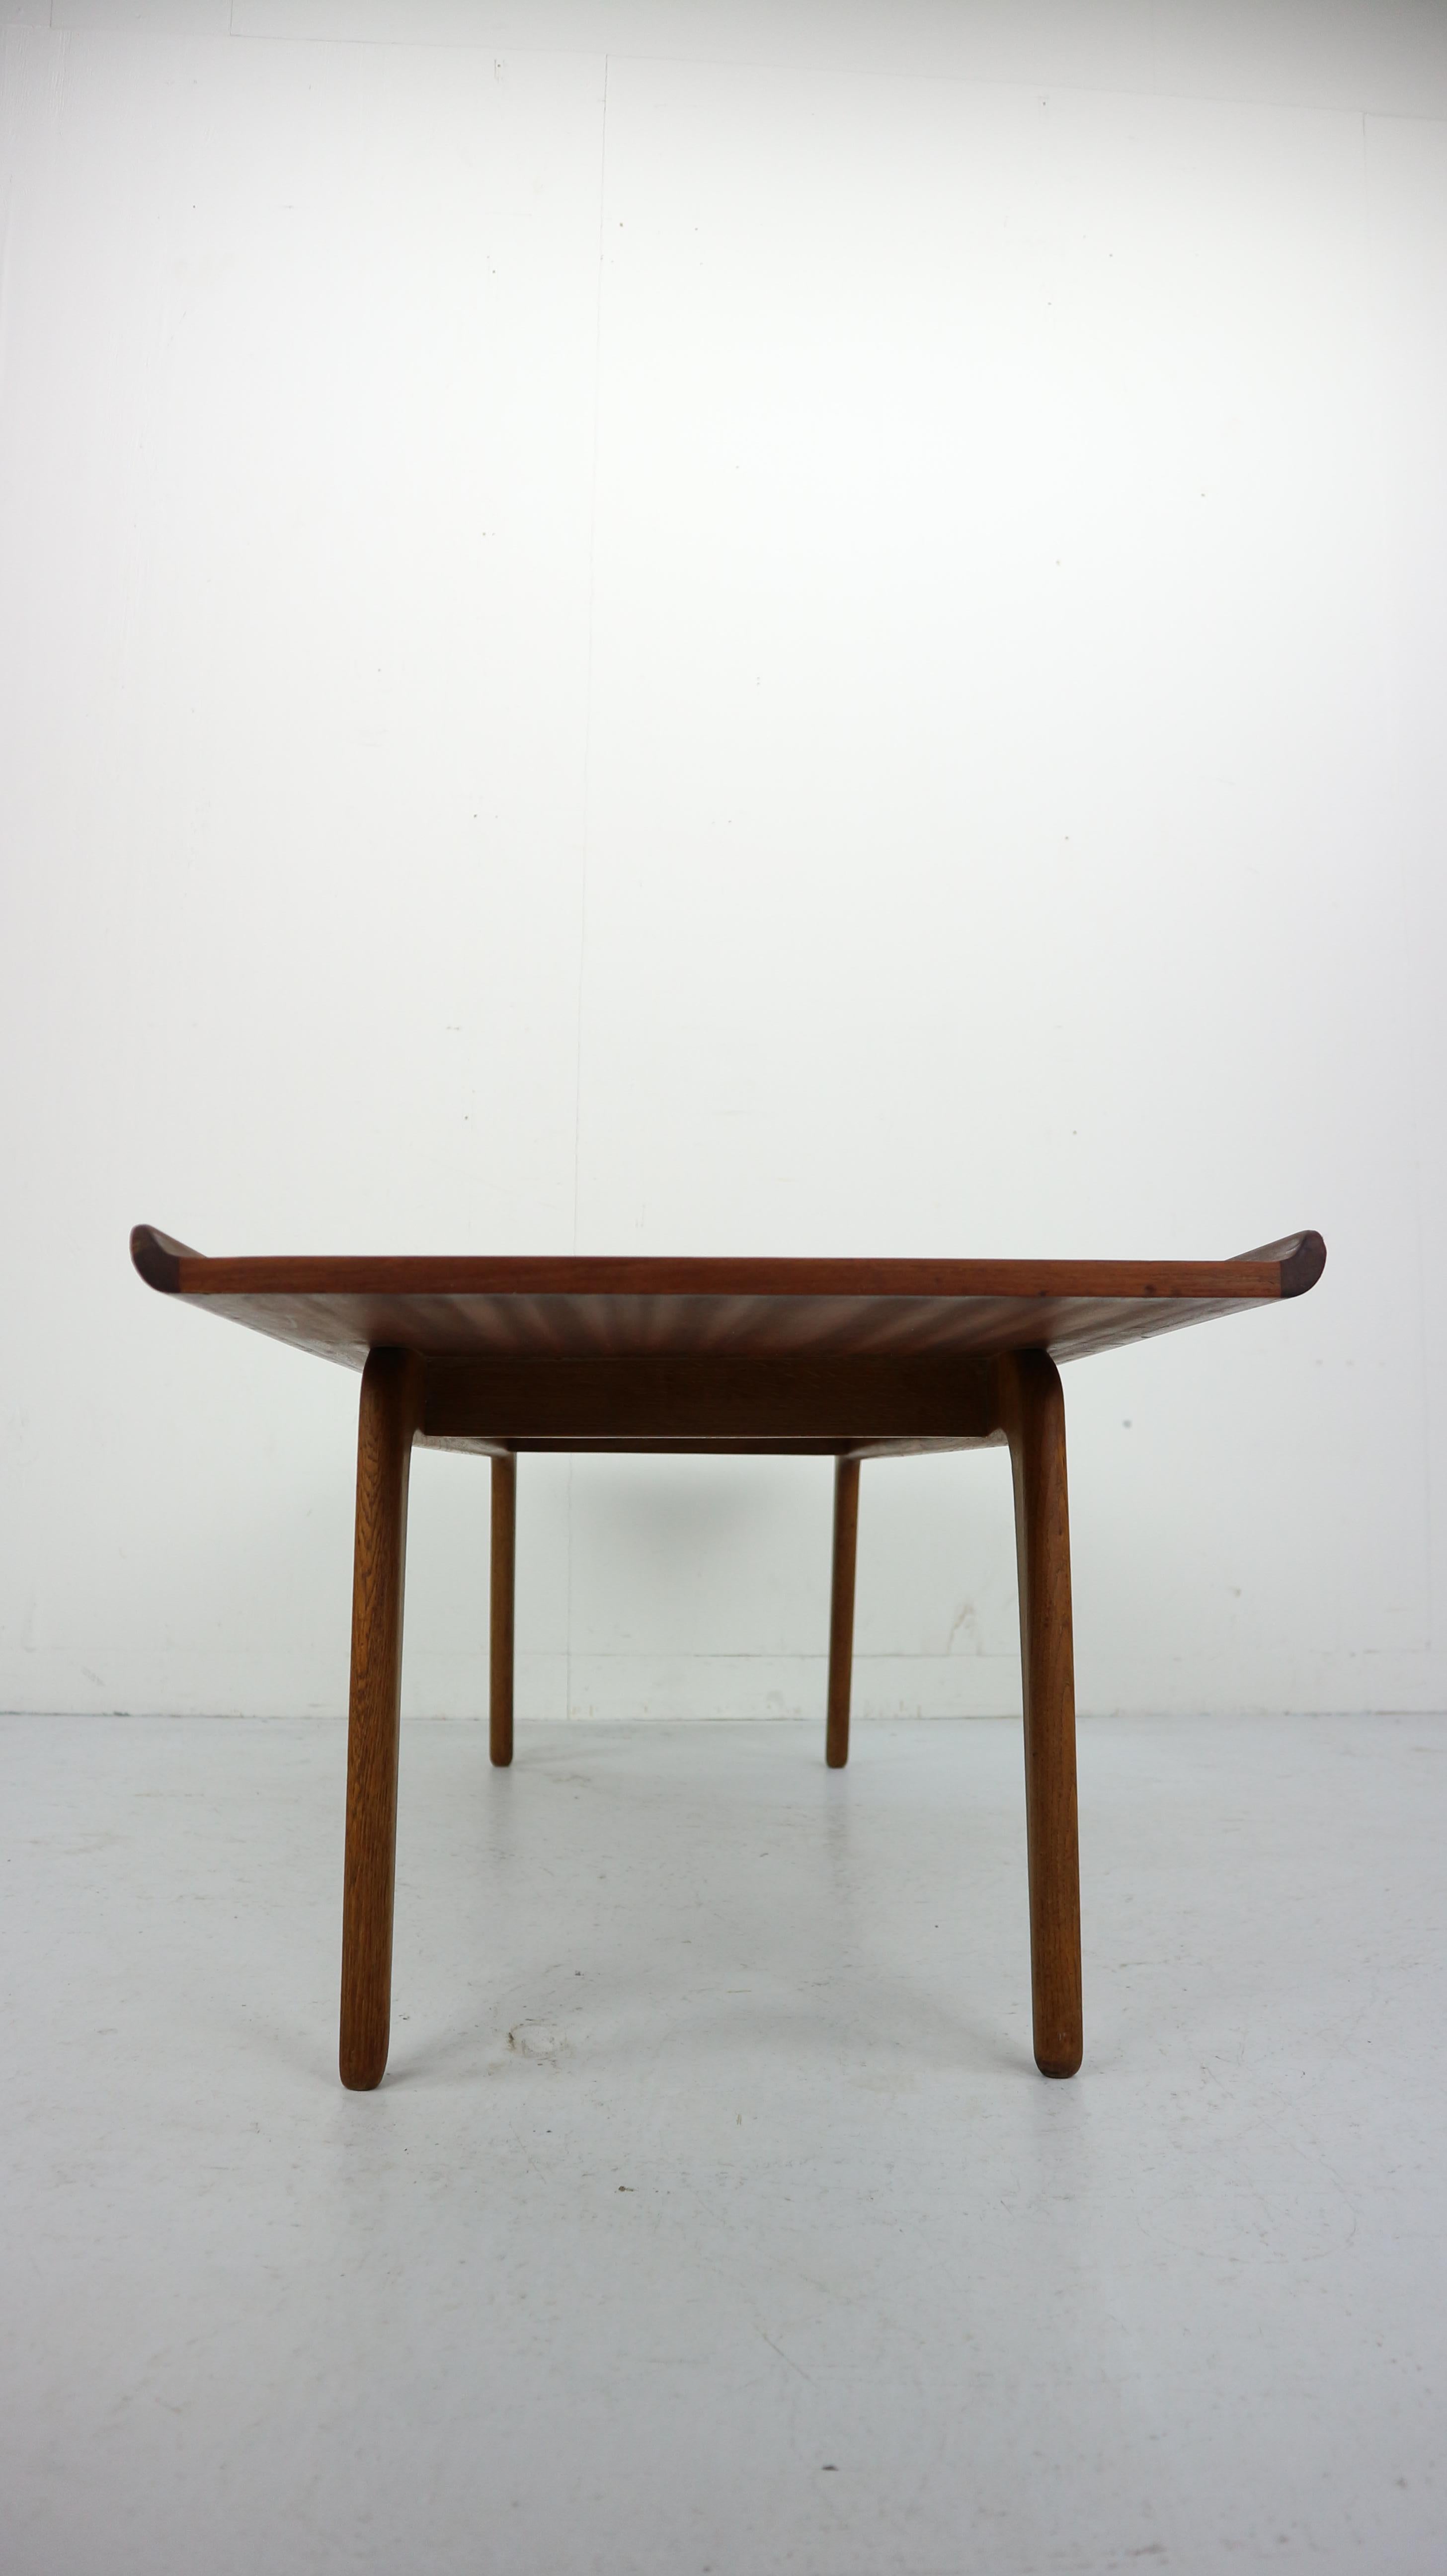 Mid-20th Century Teak and Oak Coffee Table by Aksel Madsen Bender for Bovenkamp, 1960s